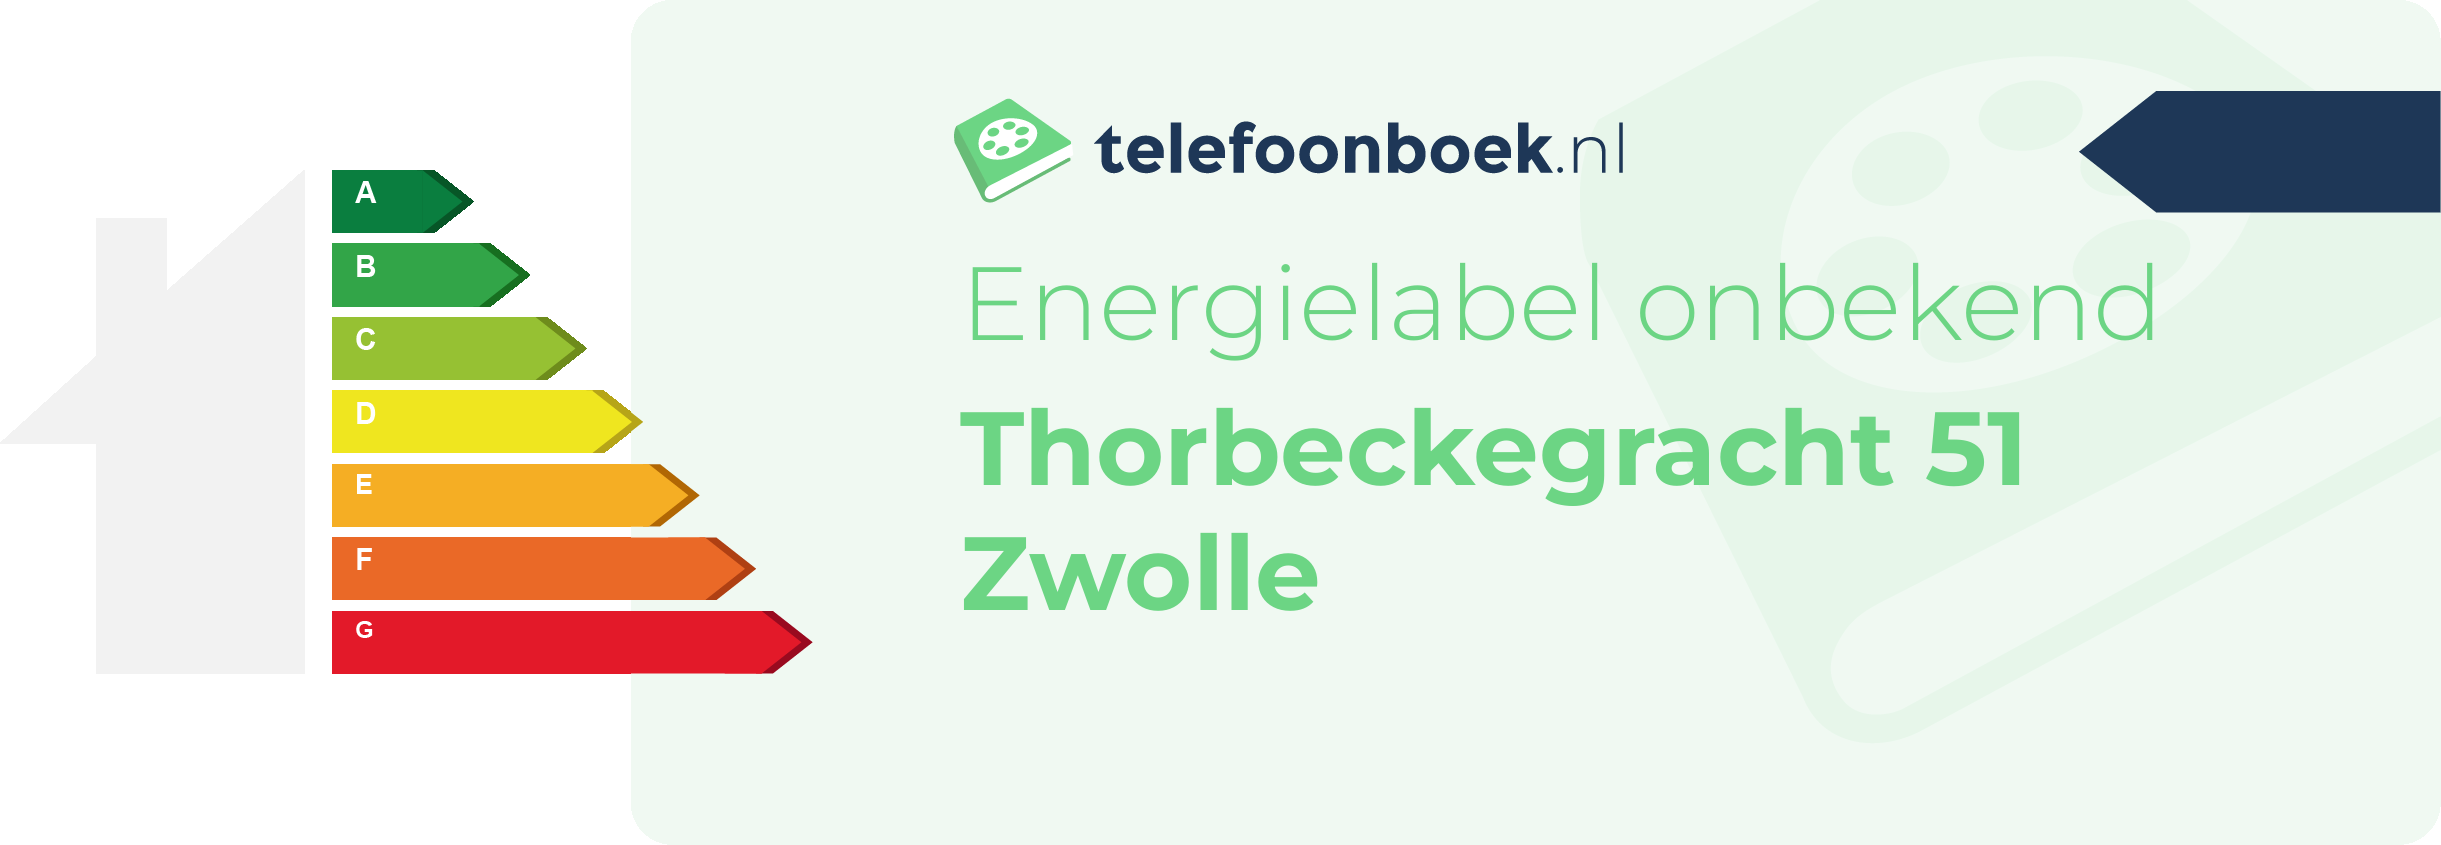 Energielabel Thorbeckegracht 51 Zwolle